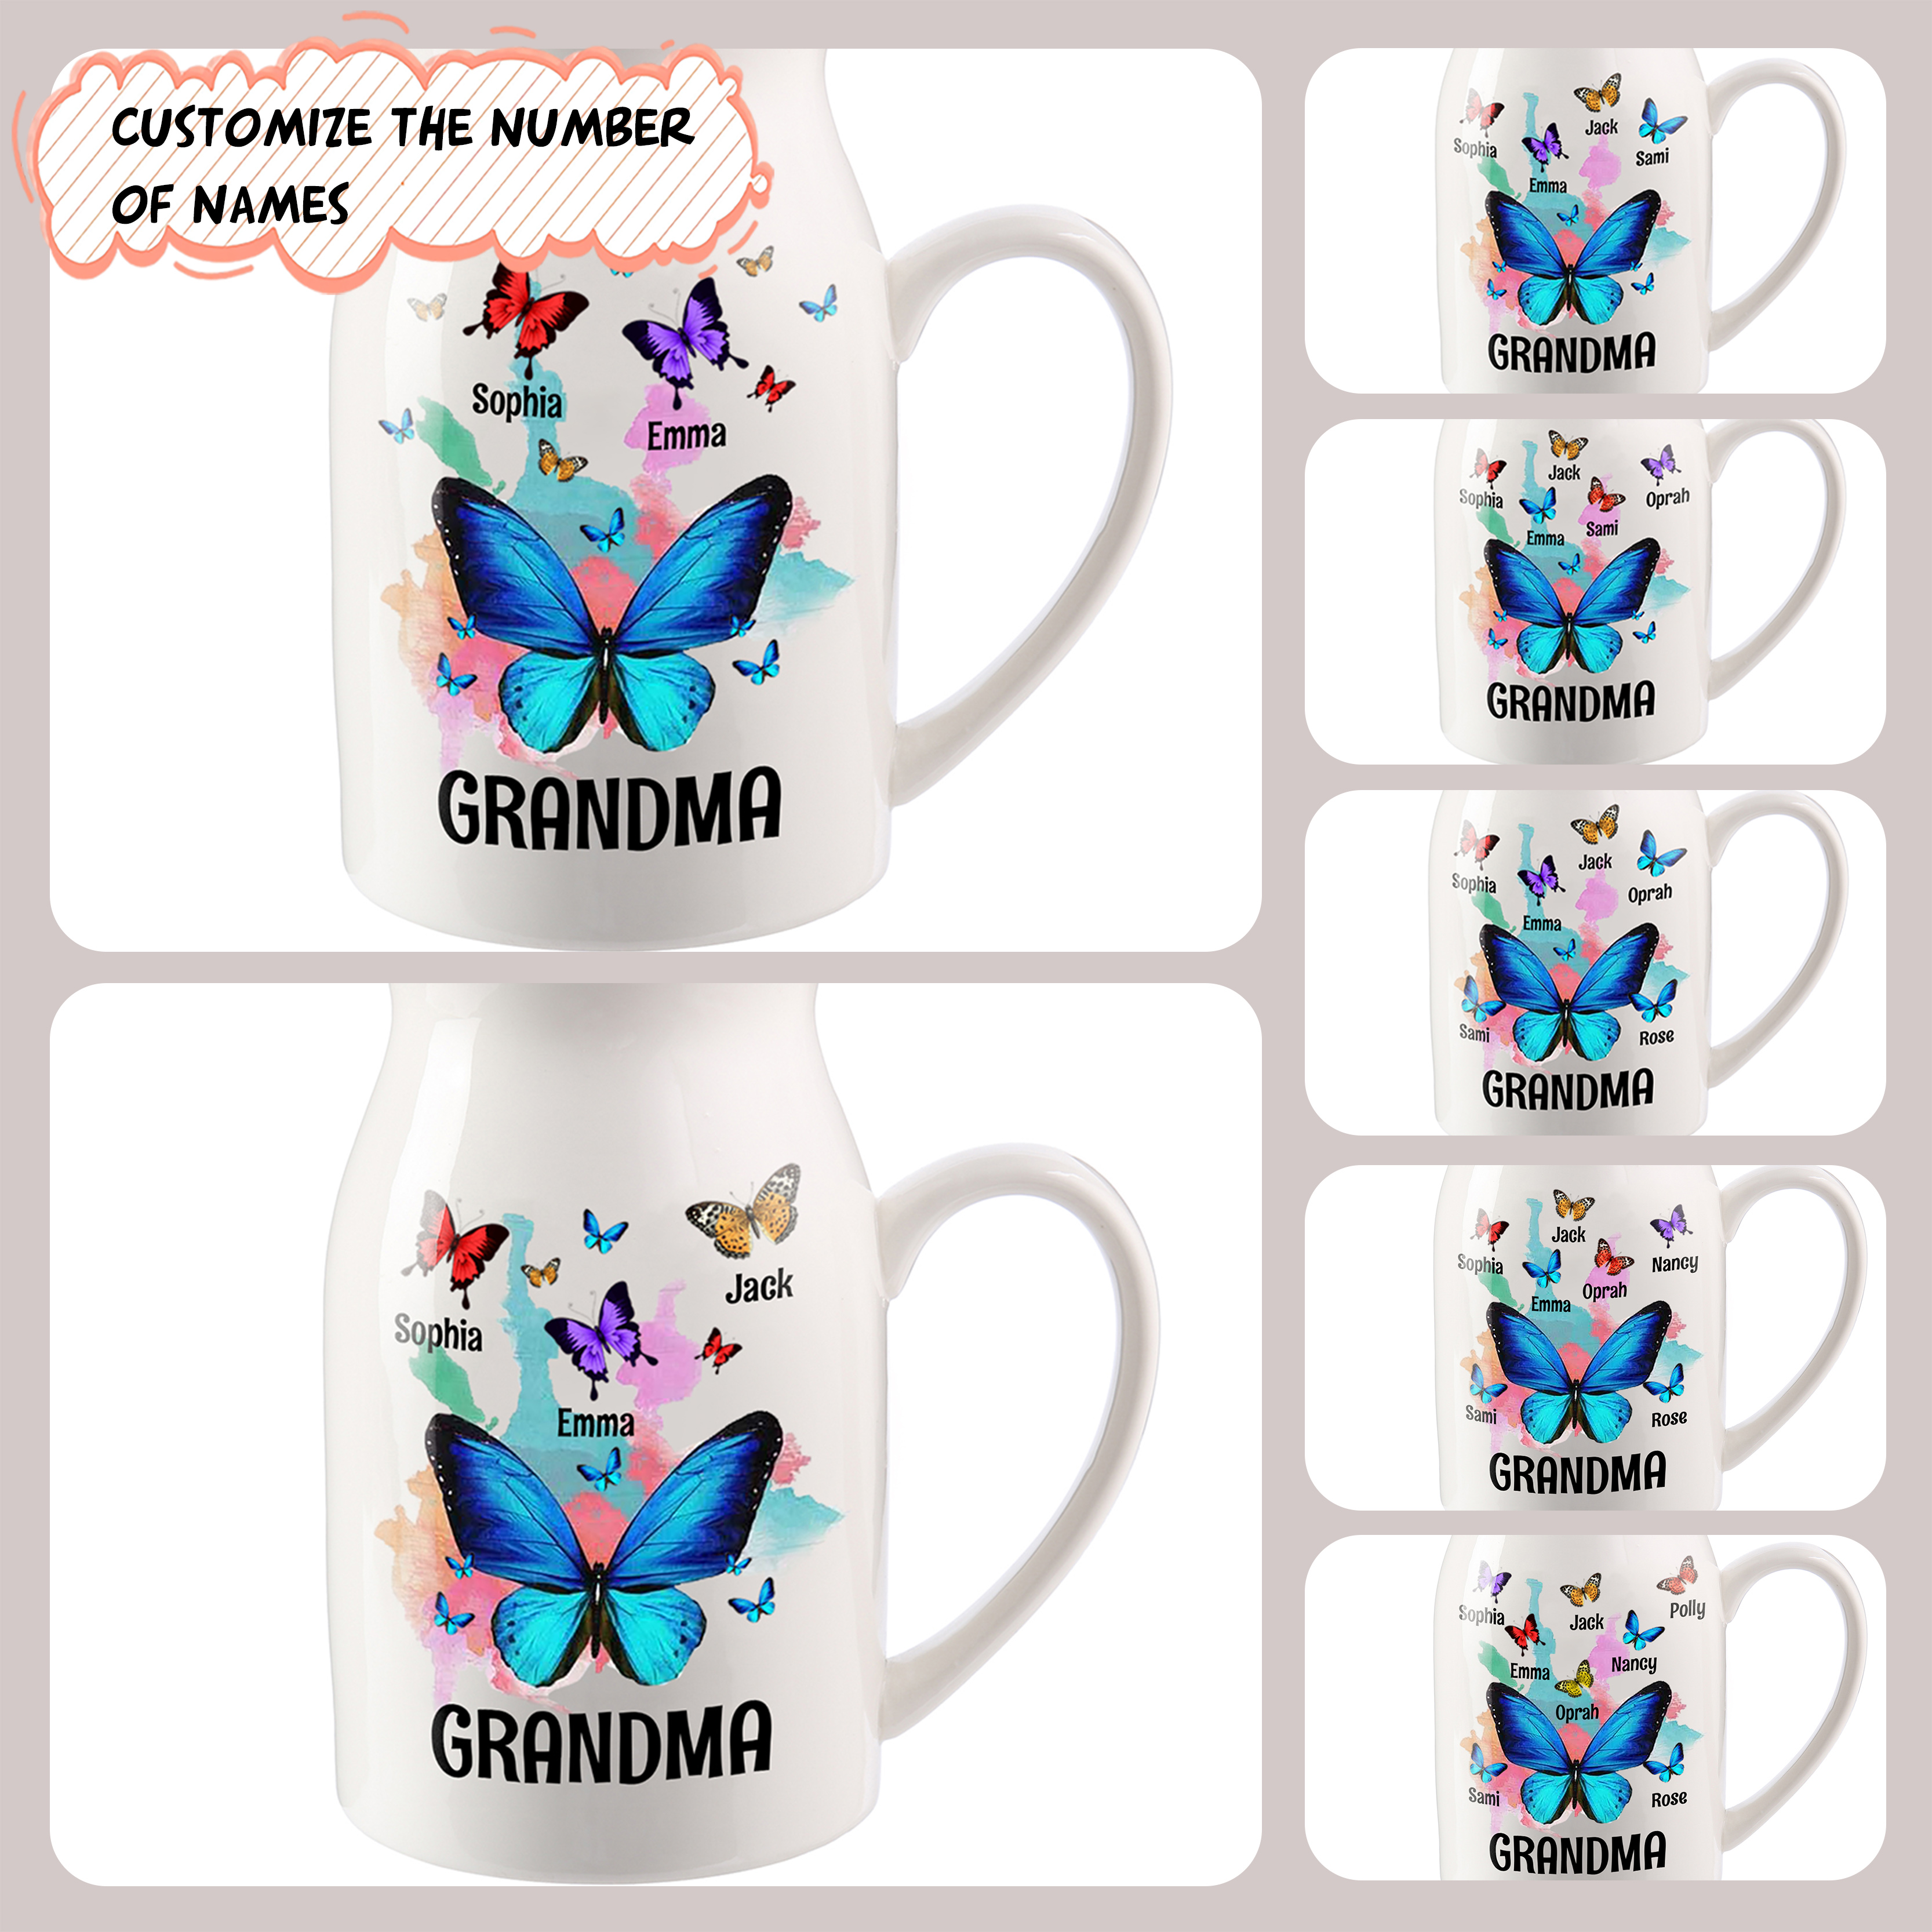 7 Names - Personalized Beautiful Colorful Butterfly Style Ceramic Vase with Customizable Names As a Wonderful Gift For Grandma